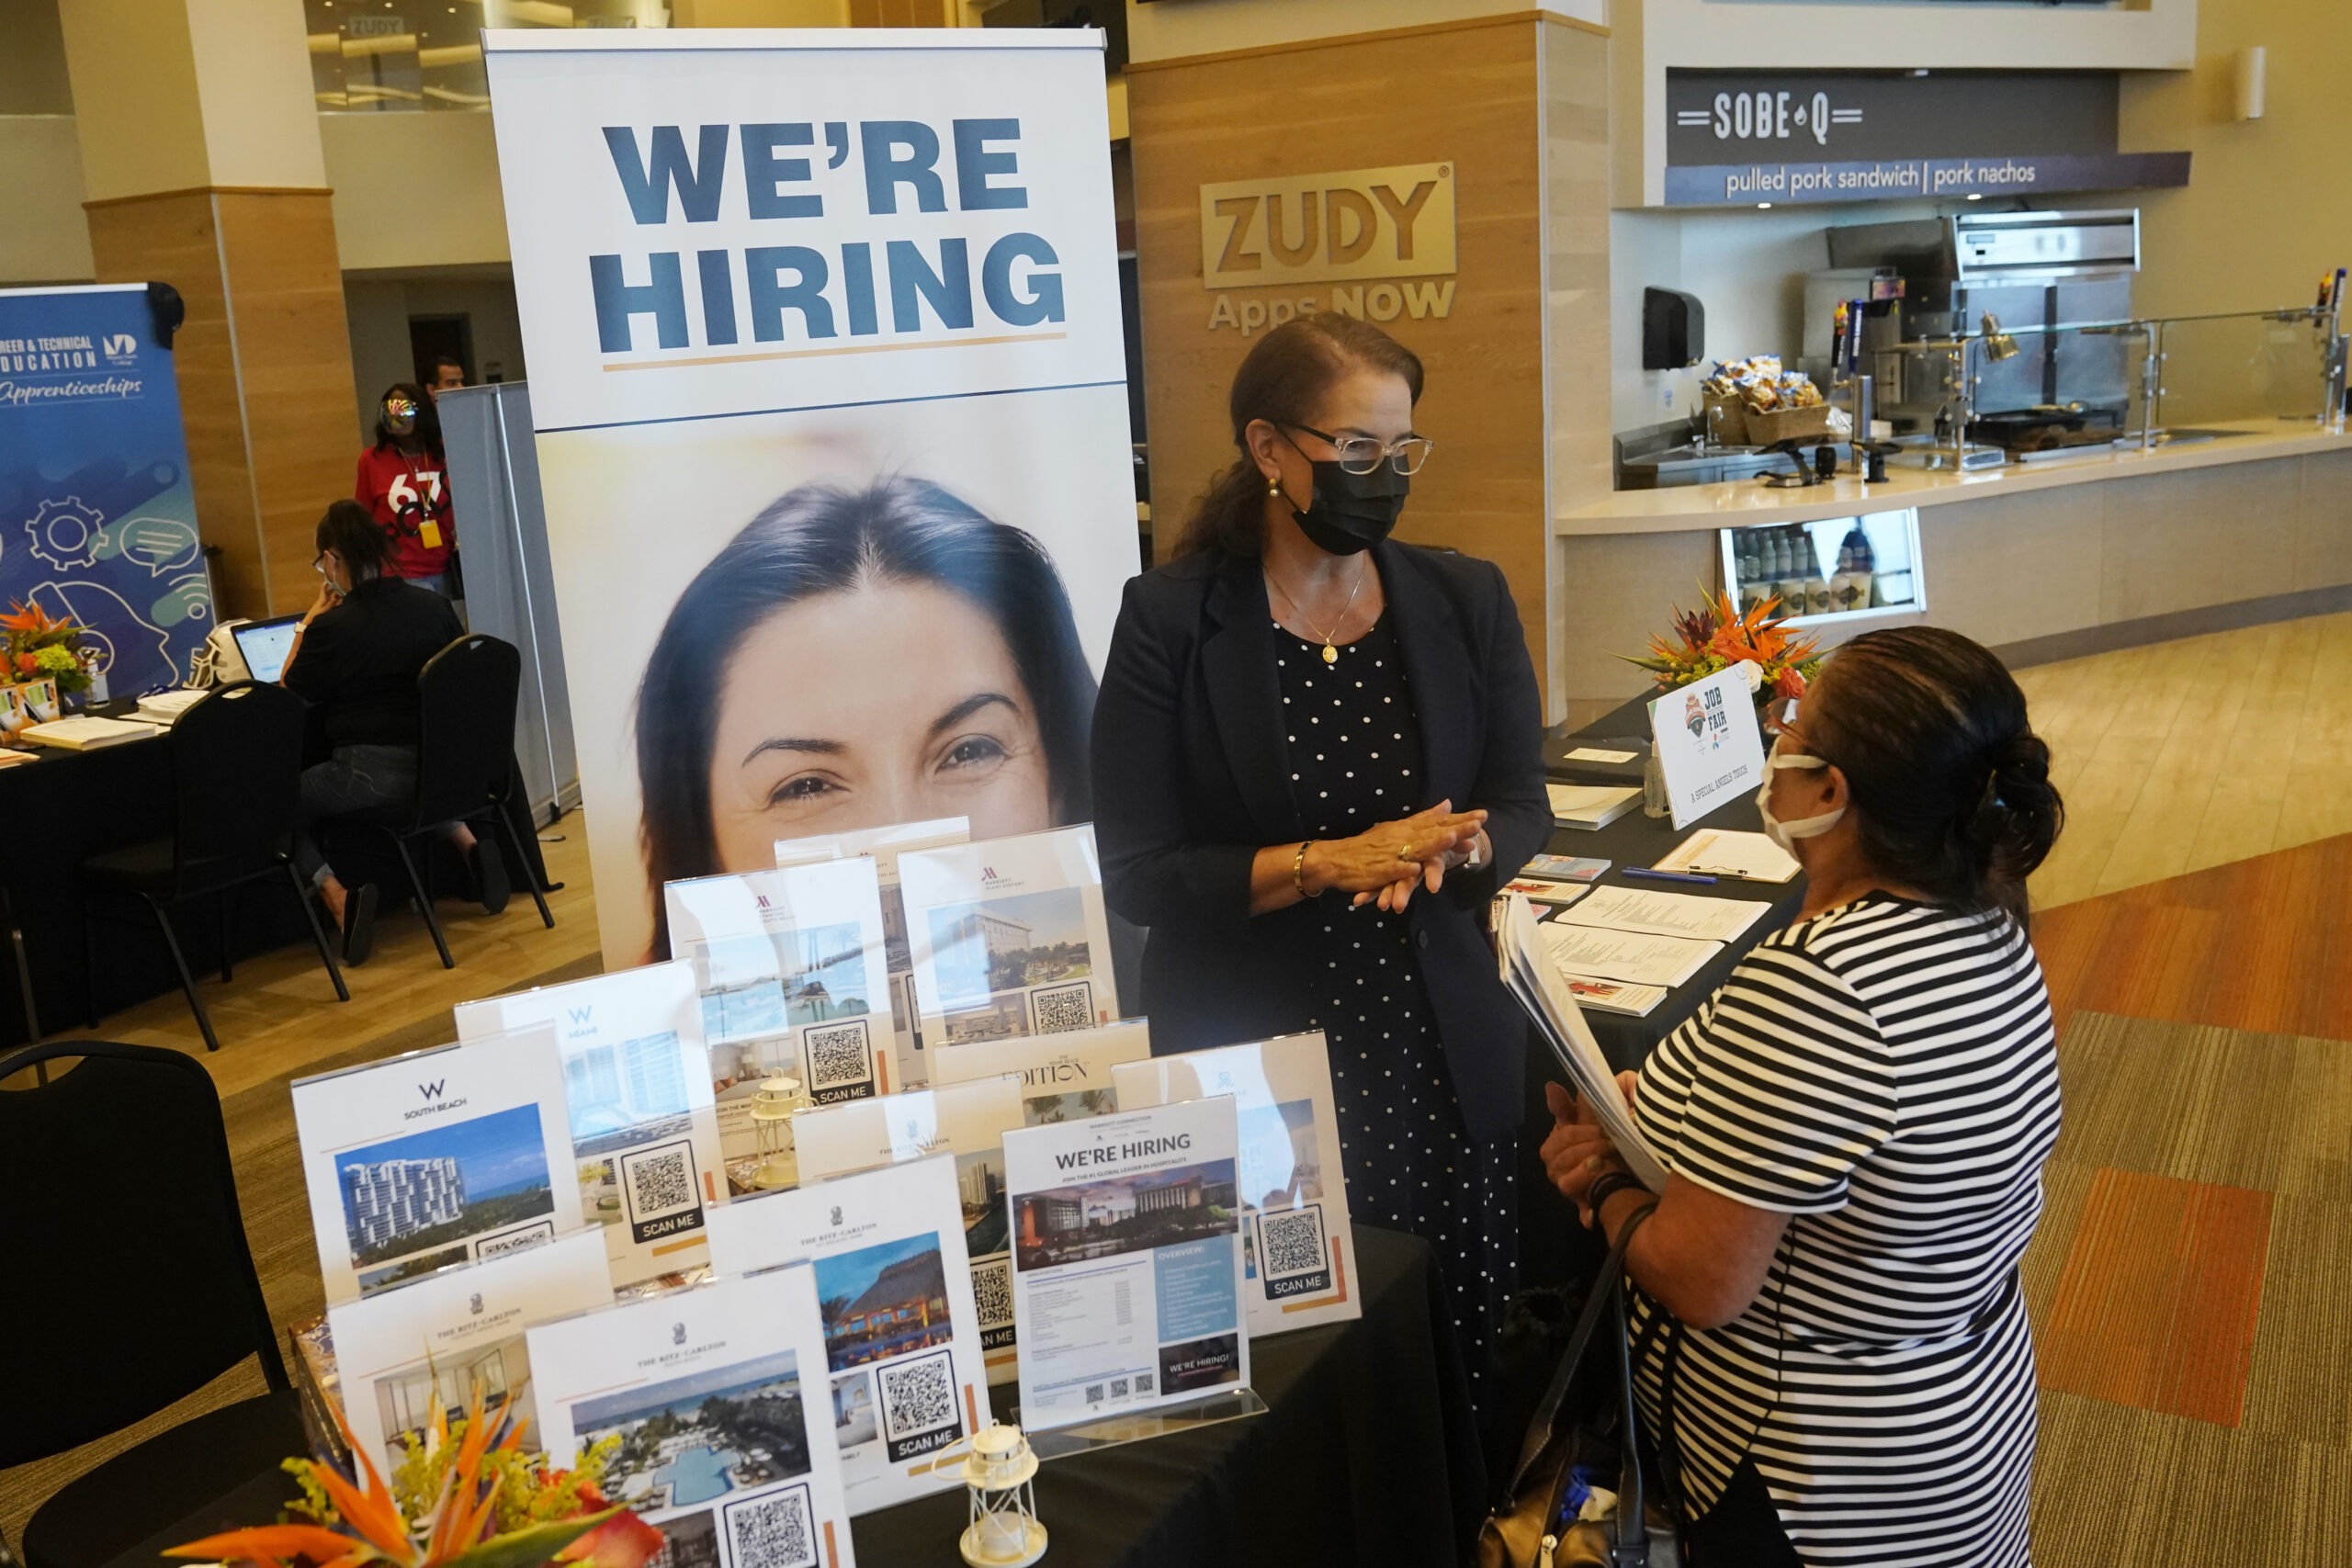 Marriott human resources recruiter Mariela Cuevas, left, talks to Lisbet Oliveros, during a job fair at Hard Rock Stadium, Friday, Sept. 3, 2021, in Miami Gardens, Fla. The number of Americans seeking unemployment benefits moved up last week to 332,000 from a pandemic low, a sign that worsening COVID-19 infections may have slightly increased layoffs. Applications for jobless aid rose from 312,000 the week before, the Labor Department said Thursday, Sept. 16. (AP Photo/Marta Lavandier)